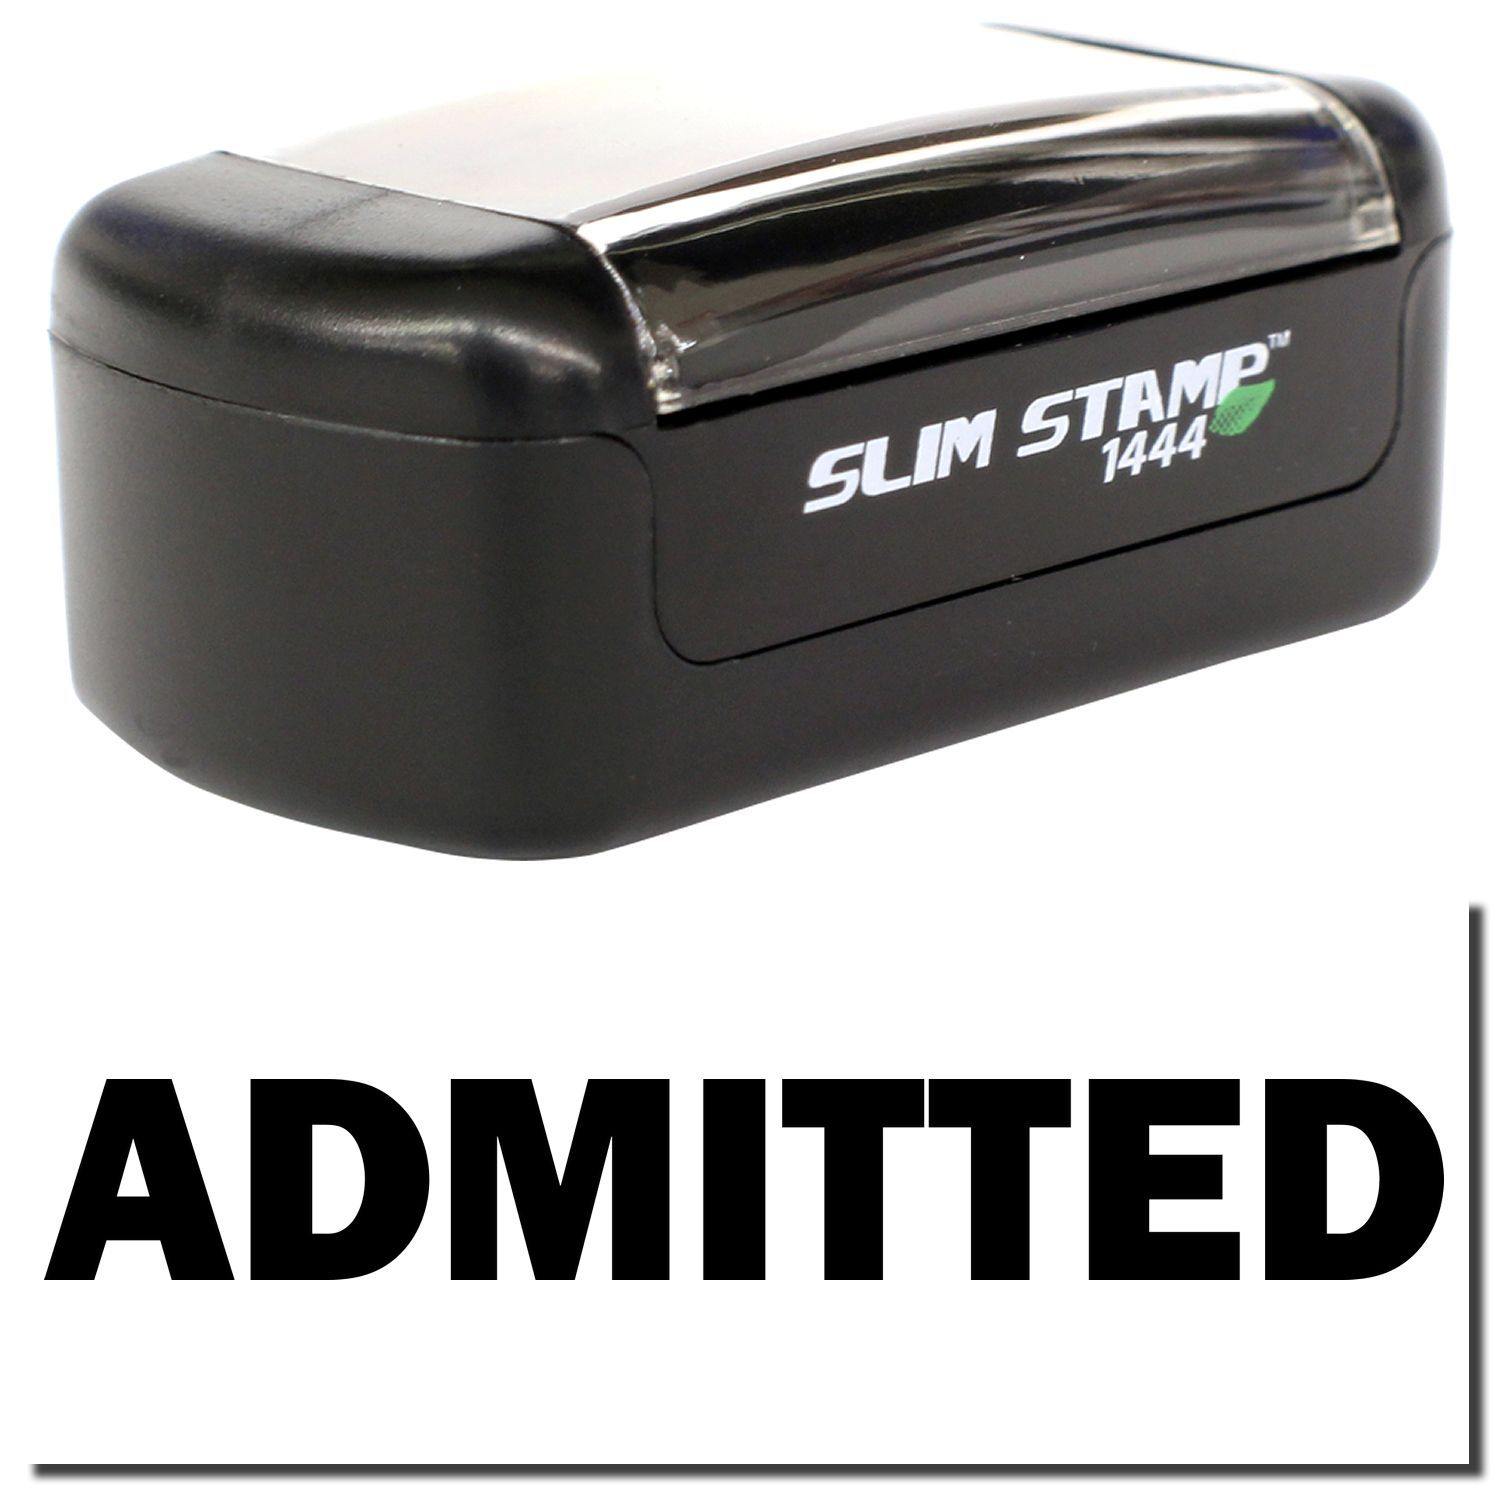 A stock office pre-inked stamp with a stamped image showing how the text "ADMITTED" is displayed after stamping.